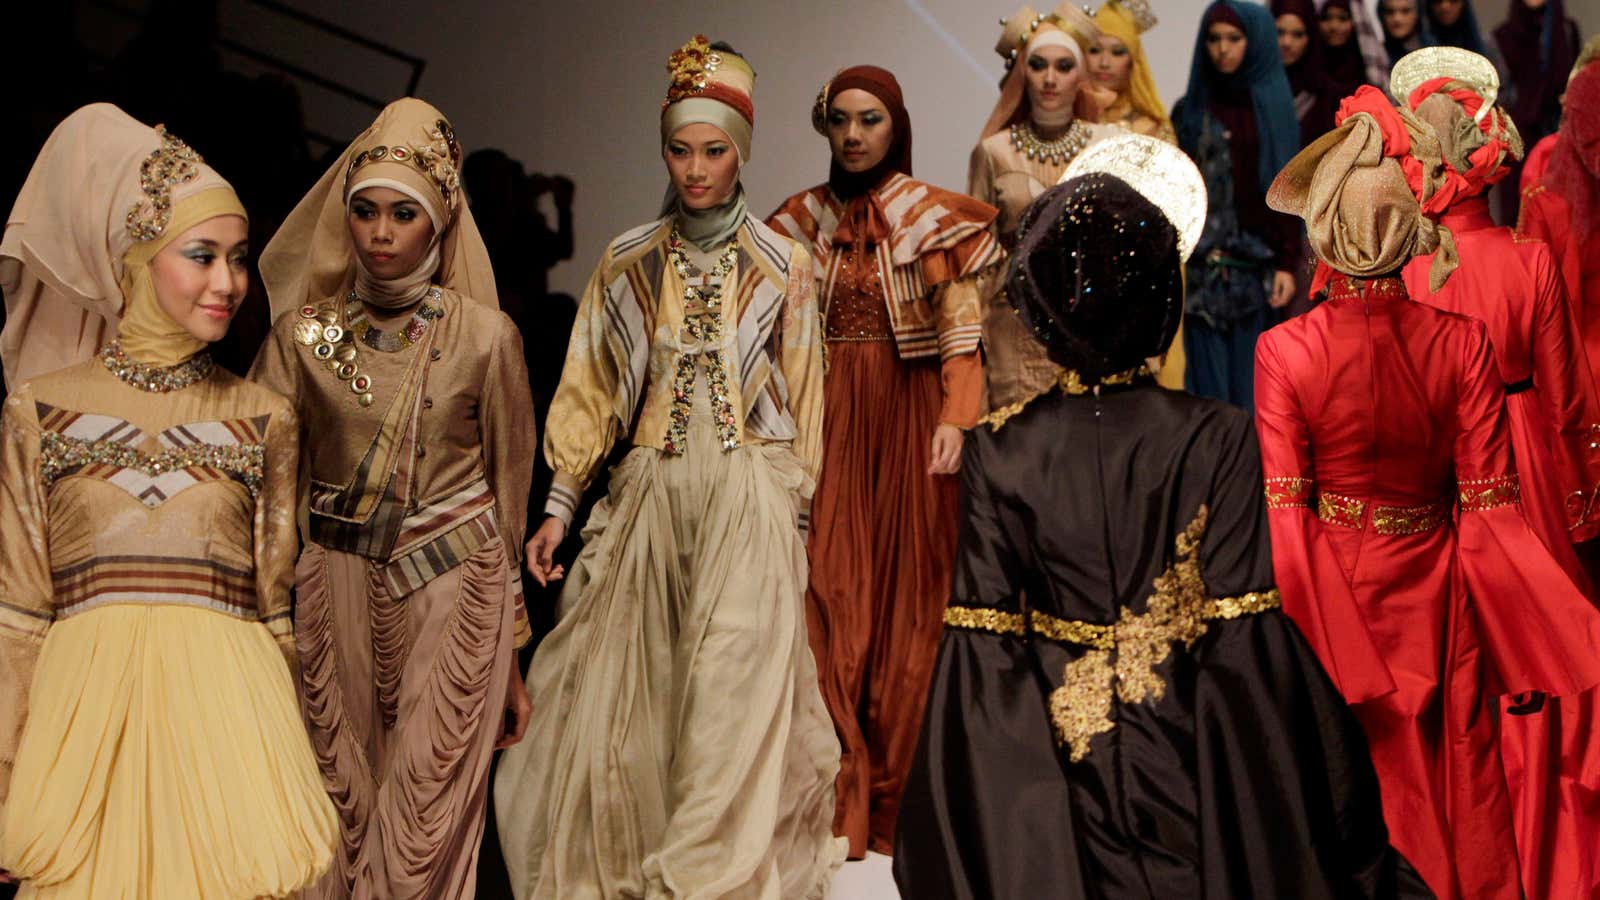 The high-end Islamic chic on display at last year’s Indonesia Fashion Week illustrates the strength of the country’s booming consumer economy.